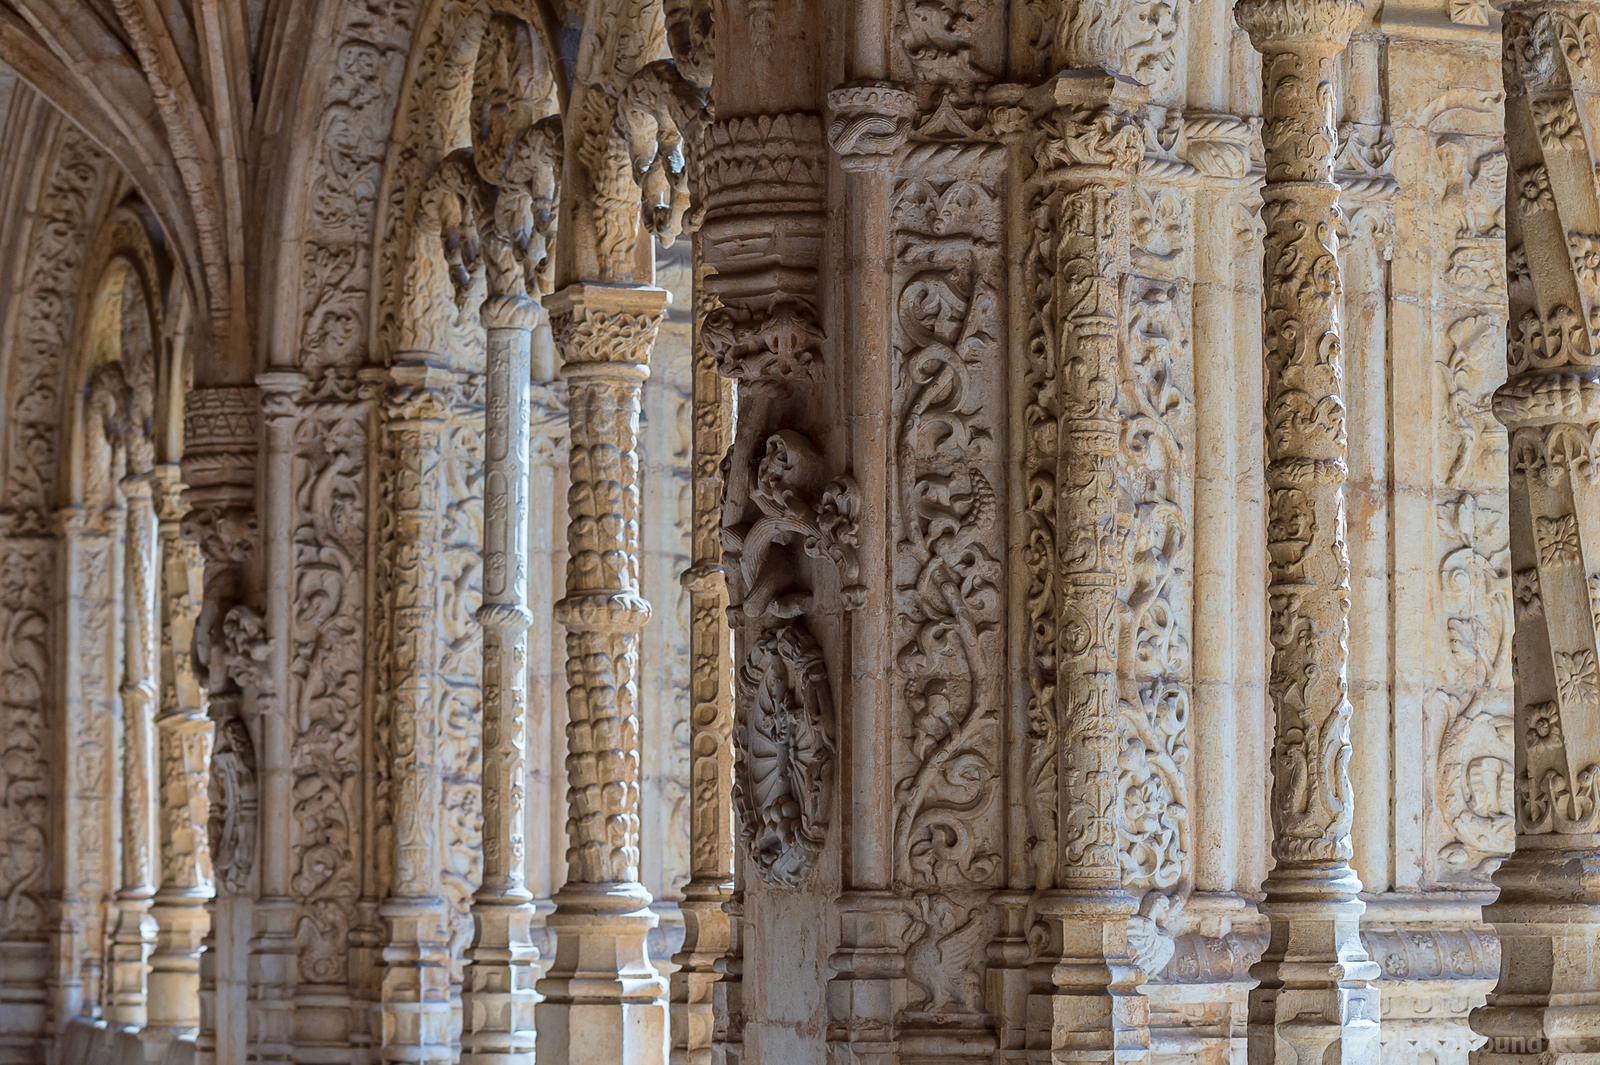 Image of Jerónimos Monastery by Sue Wolfe